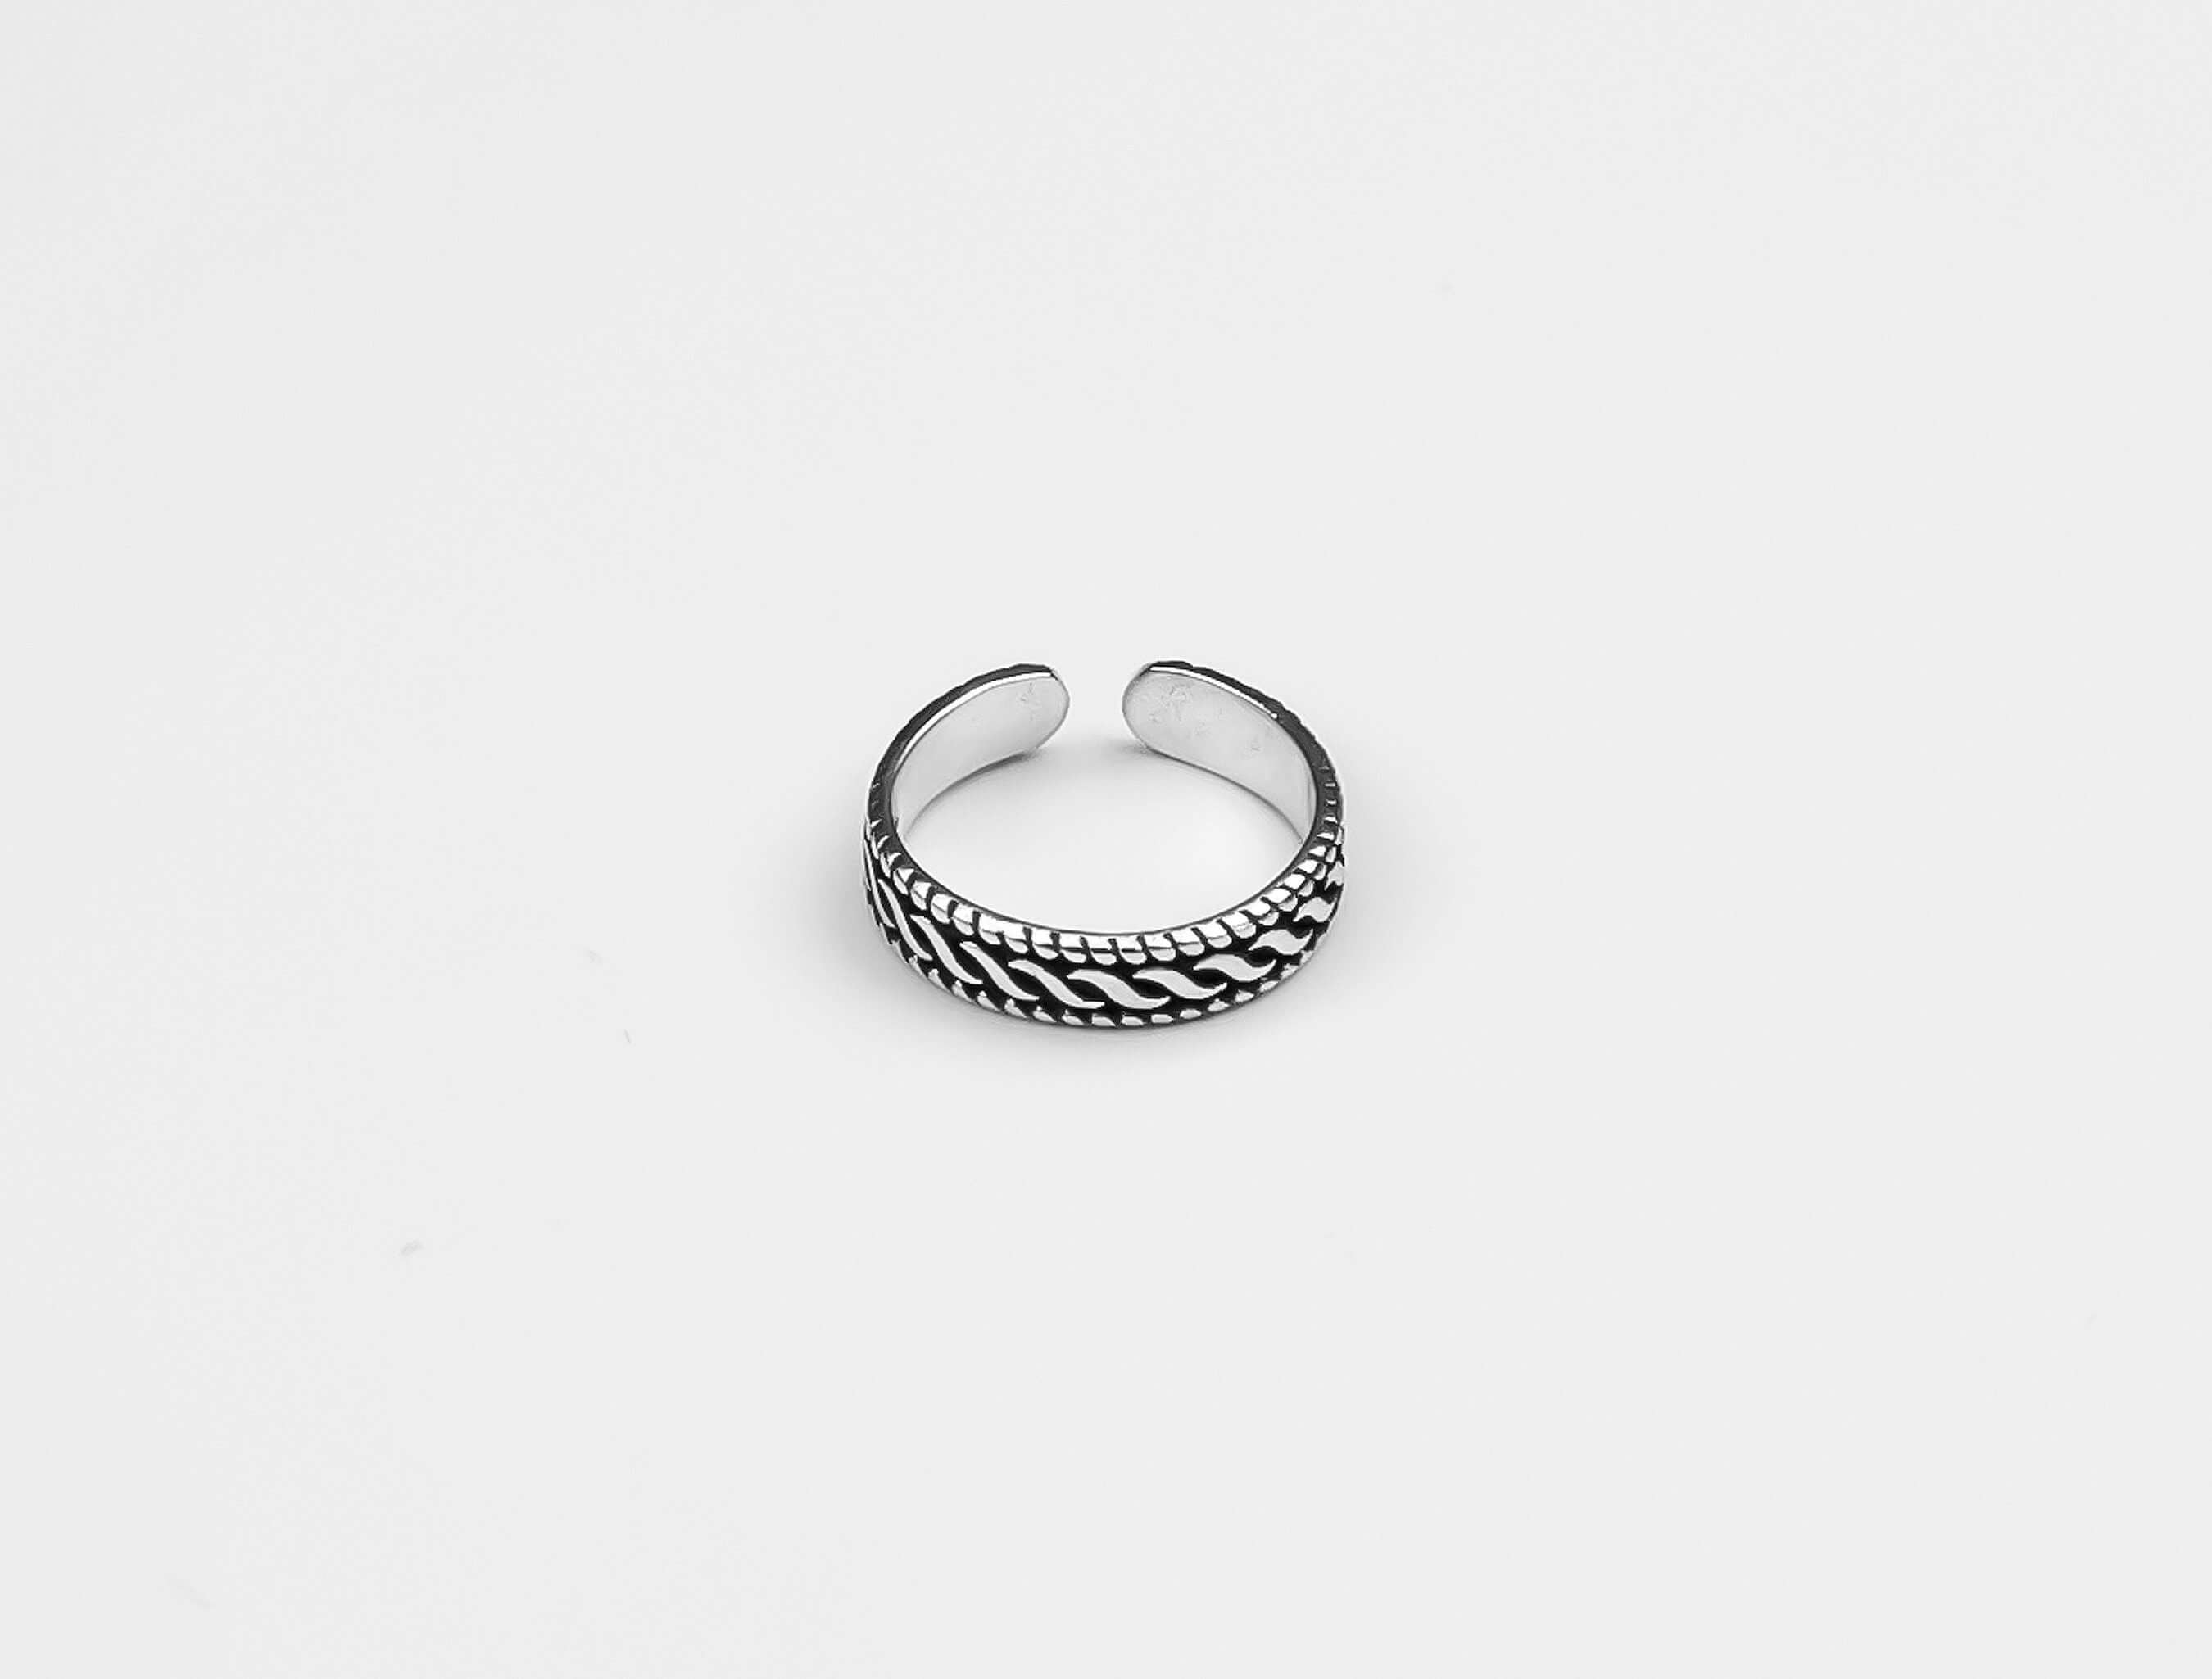 Chain Style Chunky Silver Ring, Boho Silver Ring, Adjustable Silver Ring, Best Gift for Her, Sterling Silver Knitting Pattern Thin Ring